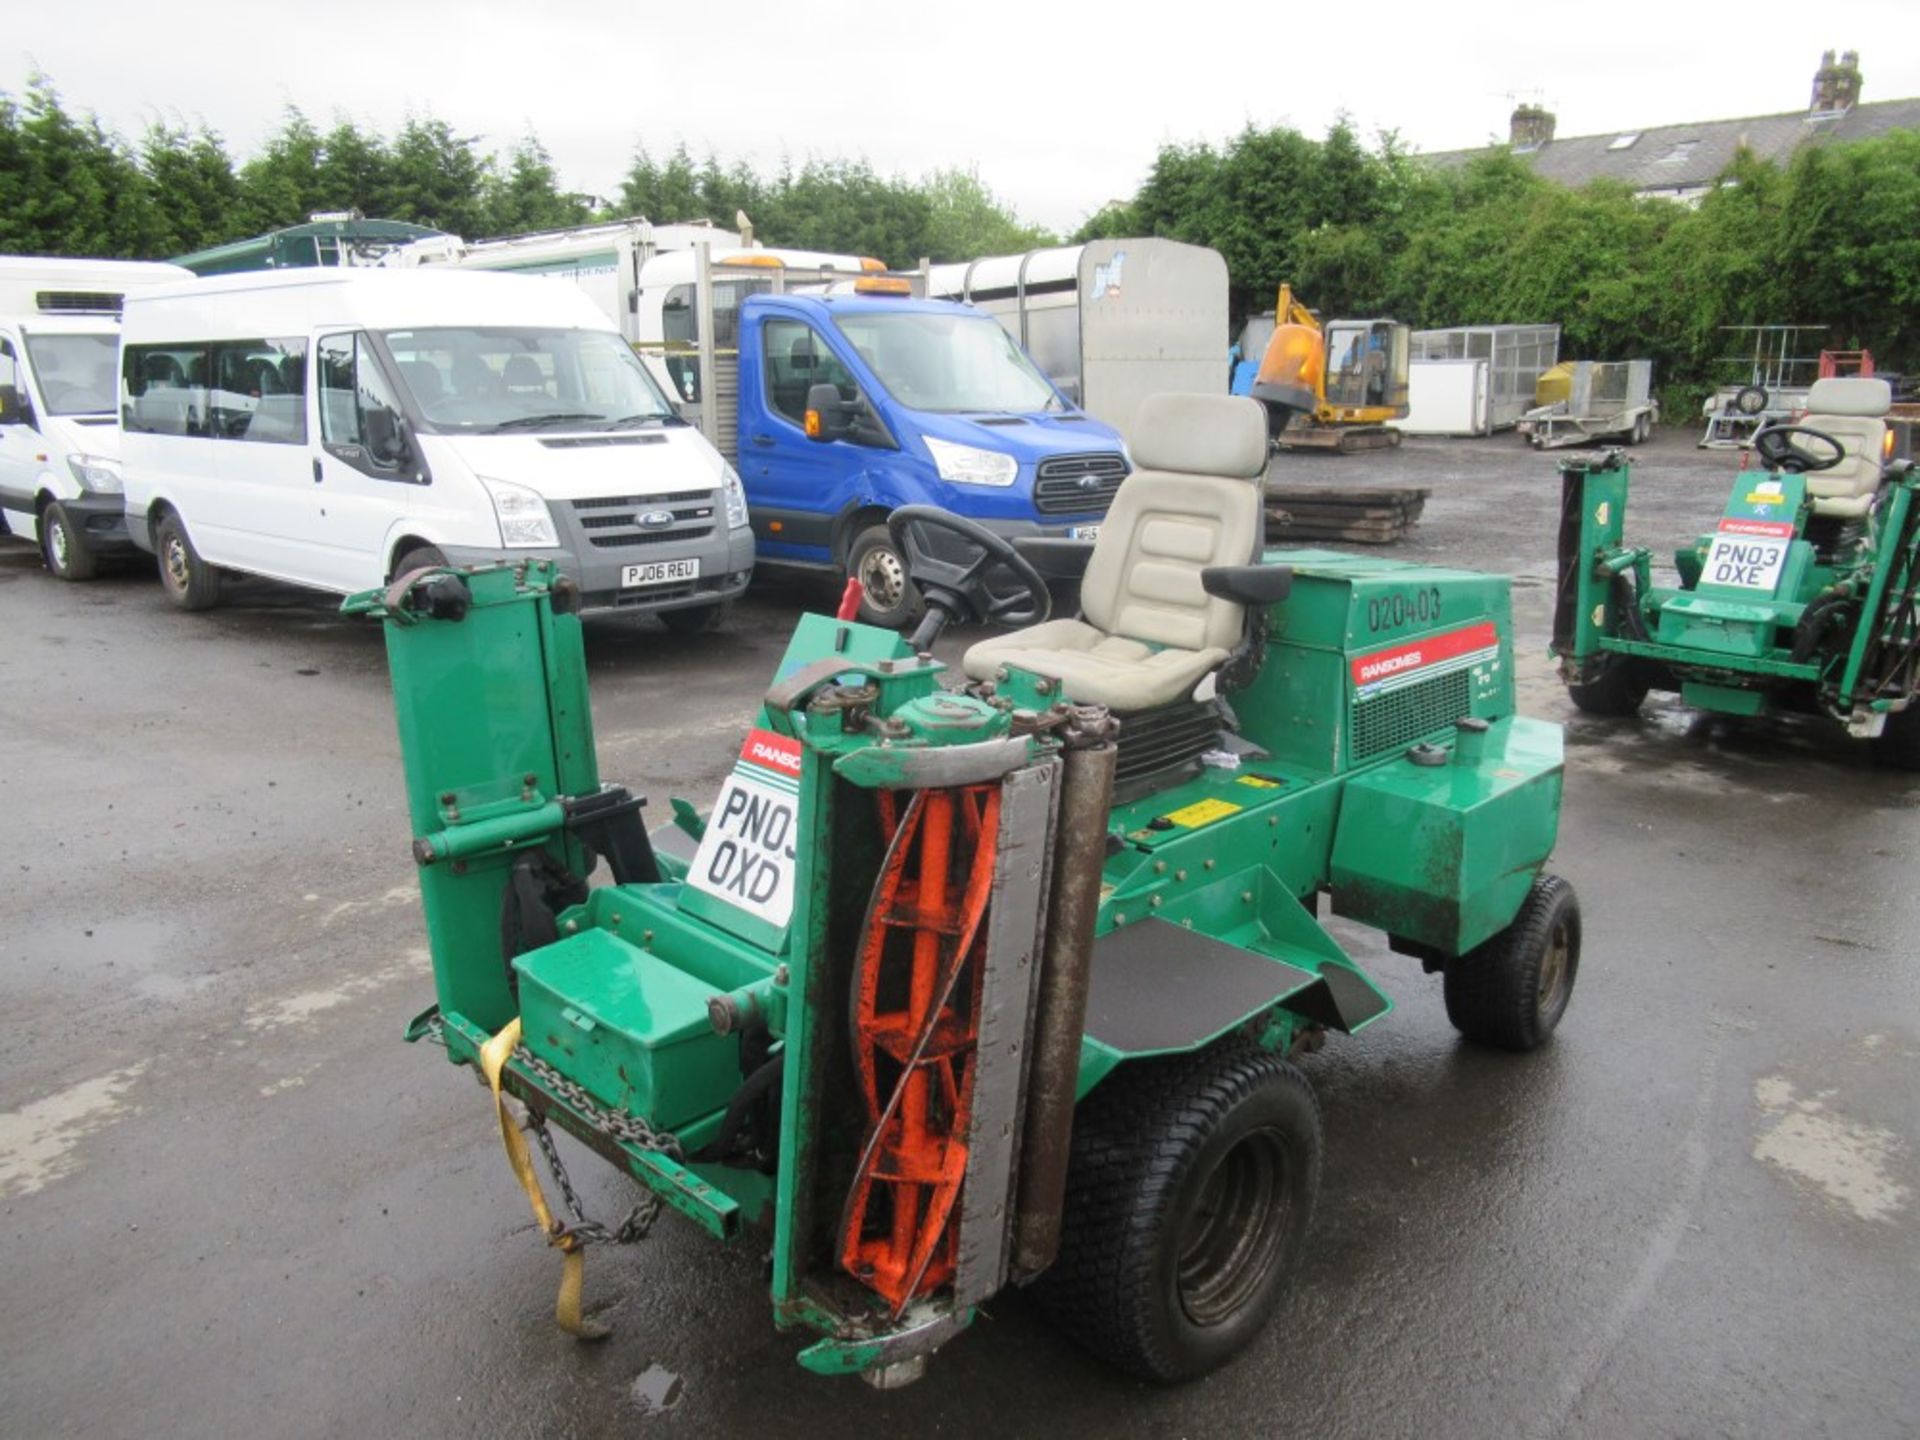 03 reg RANSOMES HIGHWAY 2130 RIDE ON MOWER (DIRECT COUNCIL) 2206 HOURS NOT WARRANTED, NO V5 [+ VAT] - Image 3 of 5